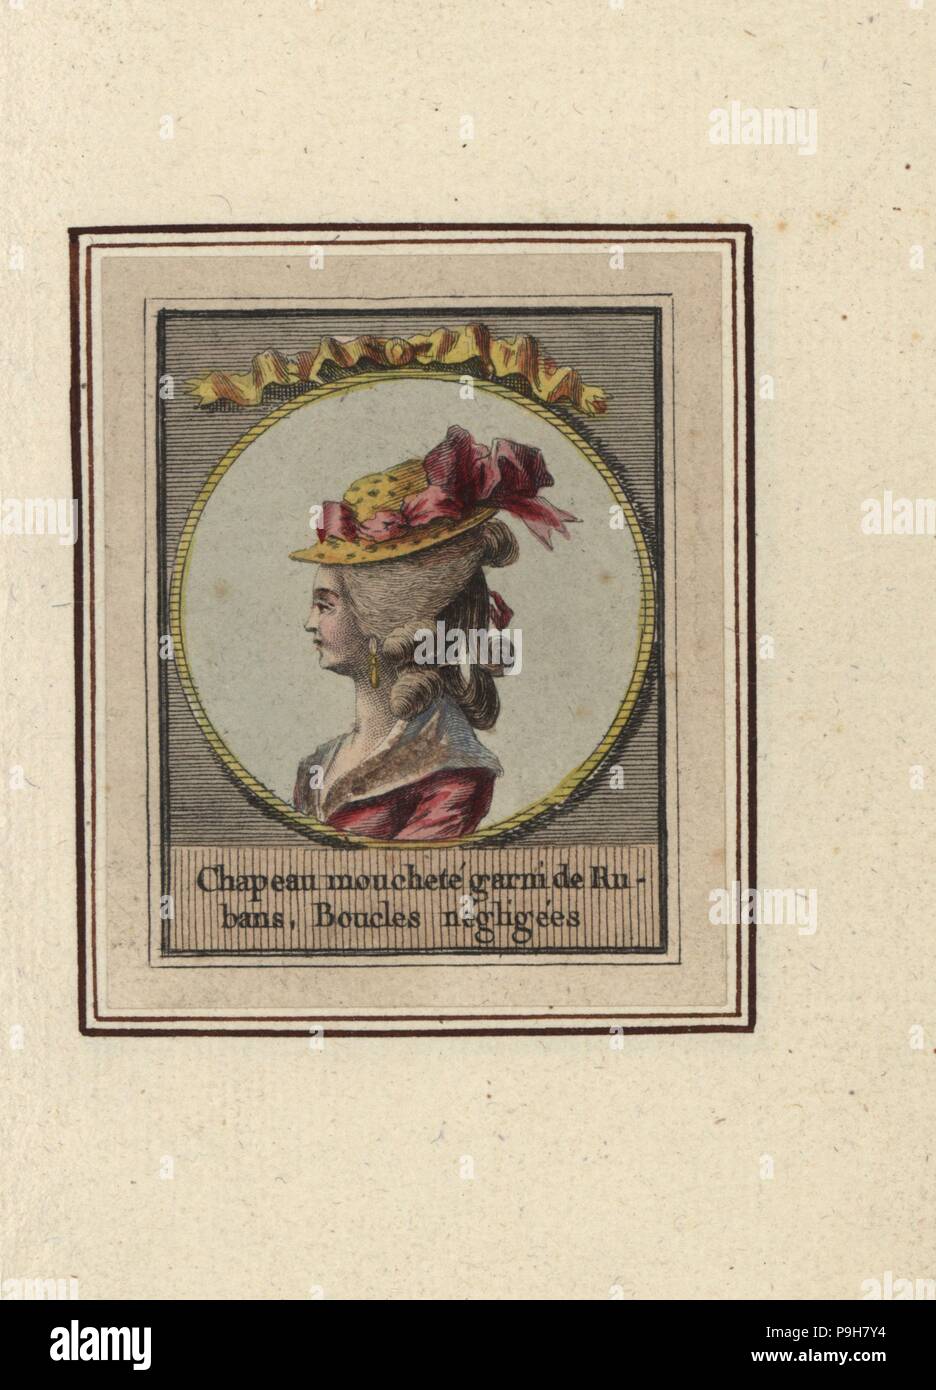 Woman in a polka-dotted hat decorated with ribbons. Hairstyle with falling curls or ringlets. Chapeau mouchete garni de Rubans, Boucles negligees. Handcoloured copperplate engraving by an unknown artist from an Album of Fashionable Hairstyles of 1783, Suite des Coeffures a la Mode en 1783, Esnauts et Rapilly, Paris, 1783. Stock Photo